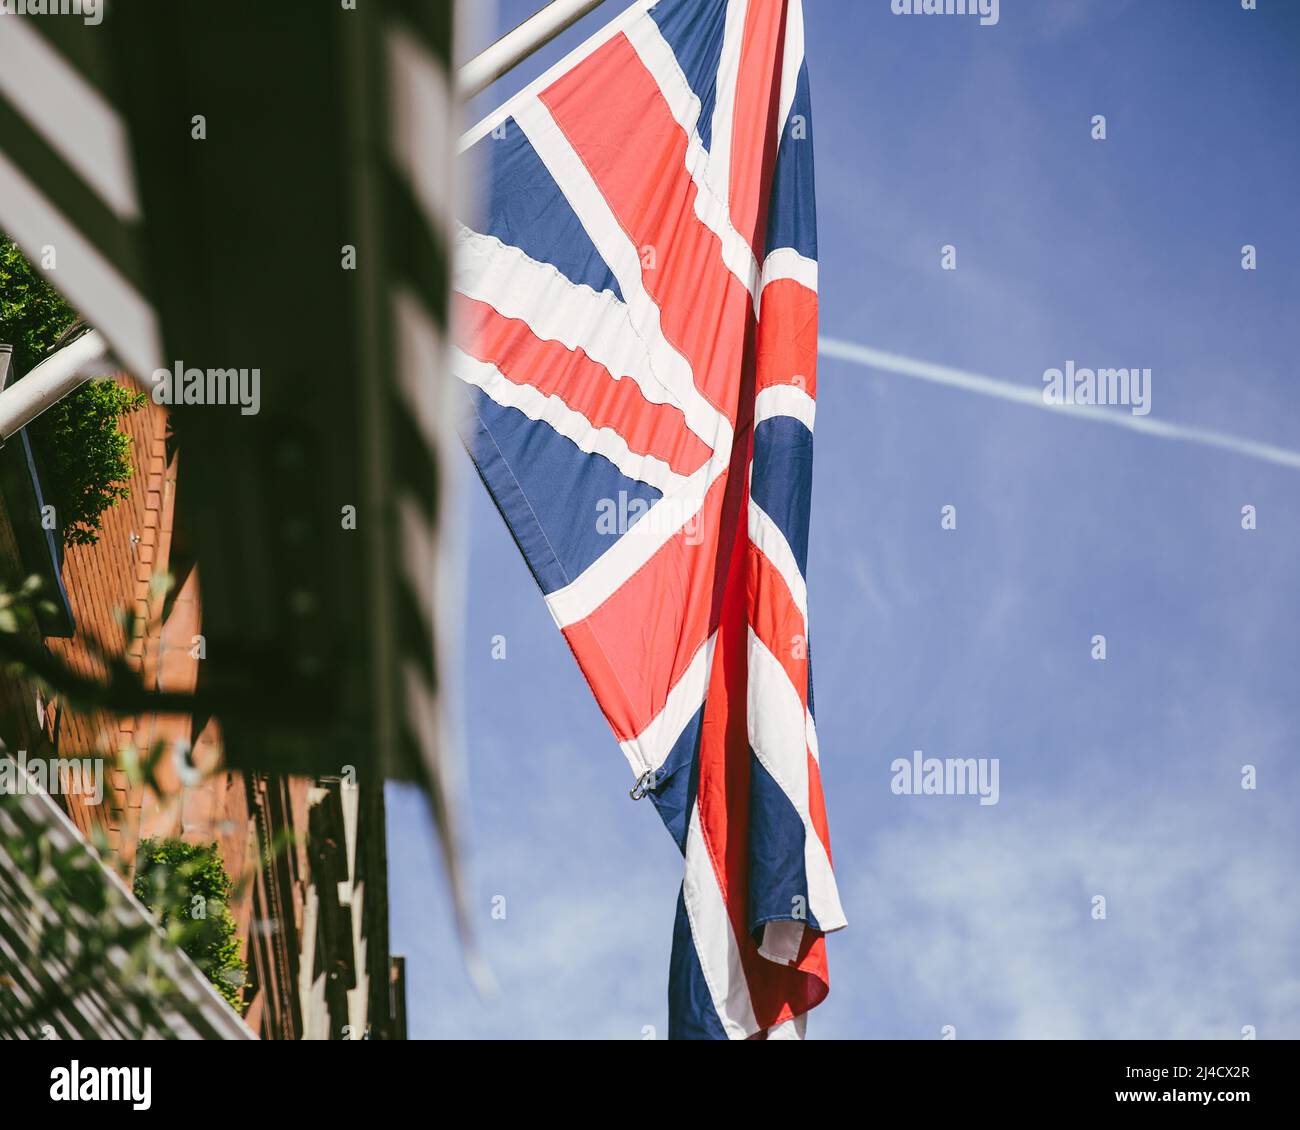 Holborn, London, UK - April 12, 2016: A union jack flag hangs, on a buildings exterior, with a blue summer sky backdrop. Stock Photo